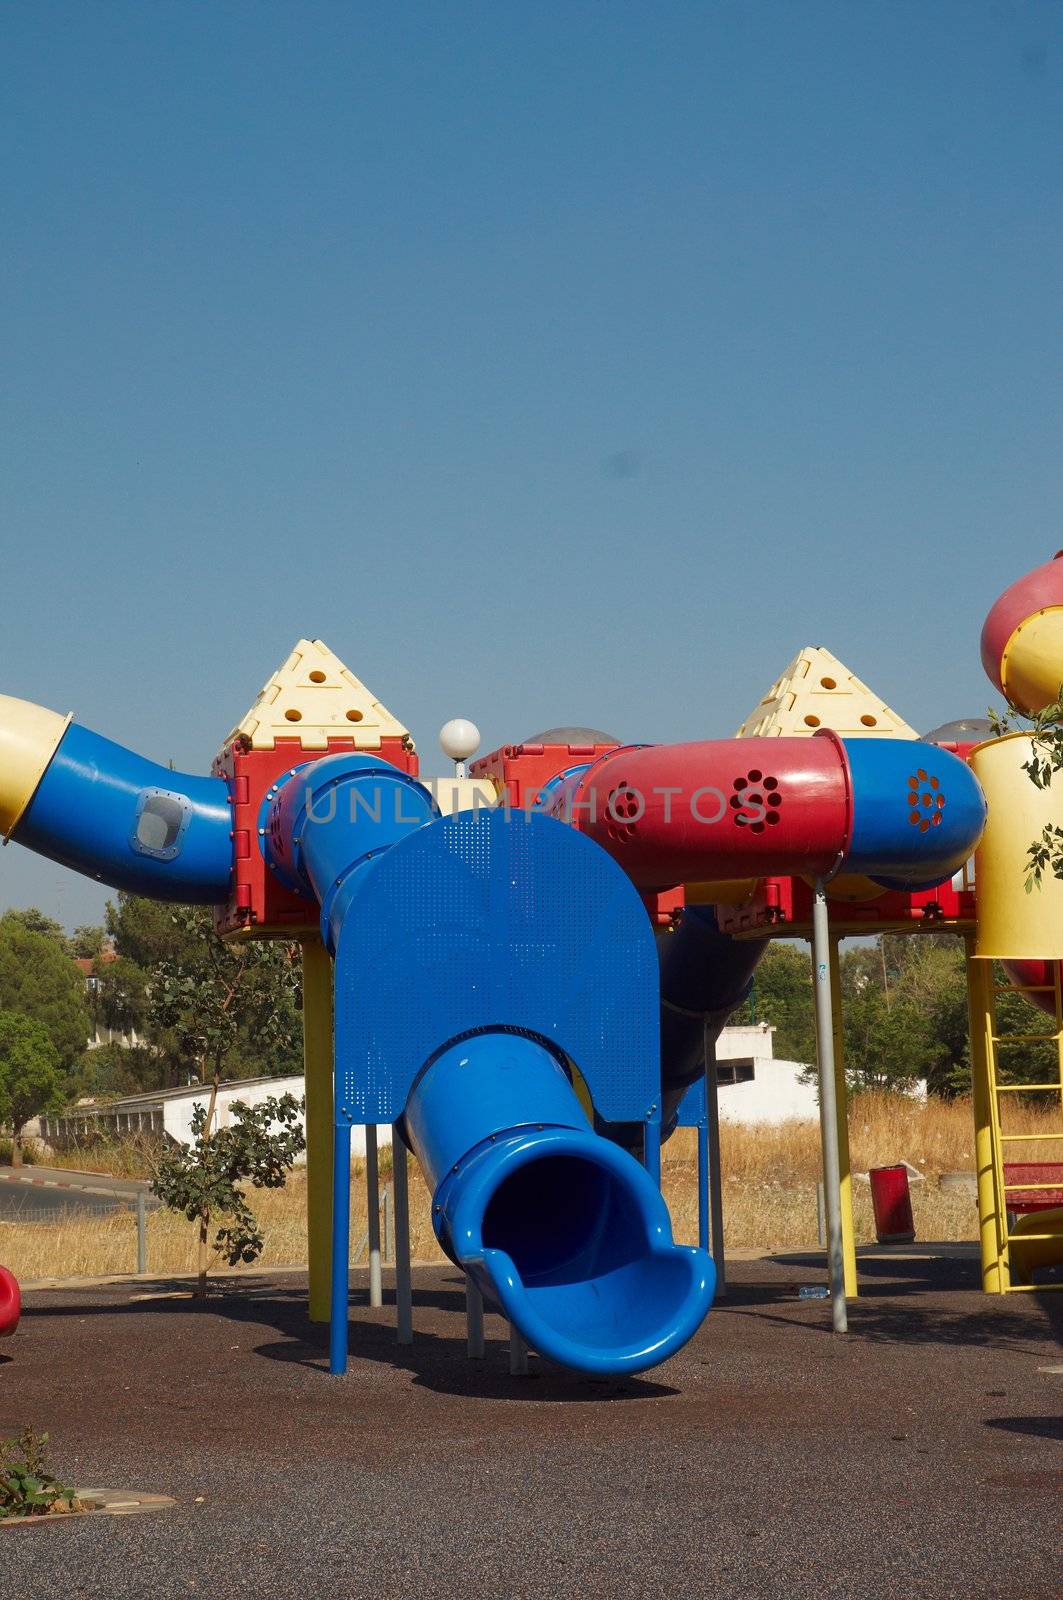 Outdoor kids playground with bright colors .